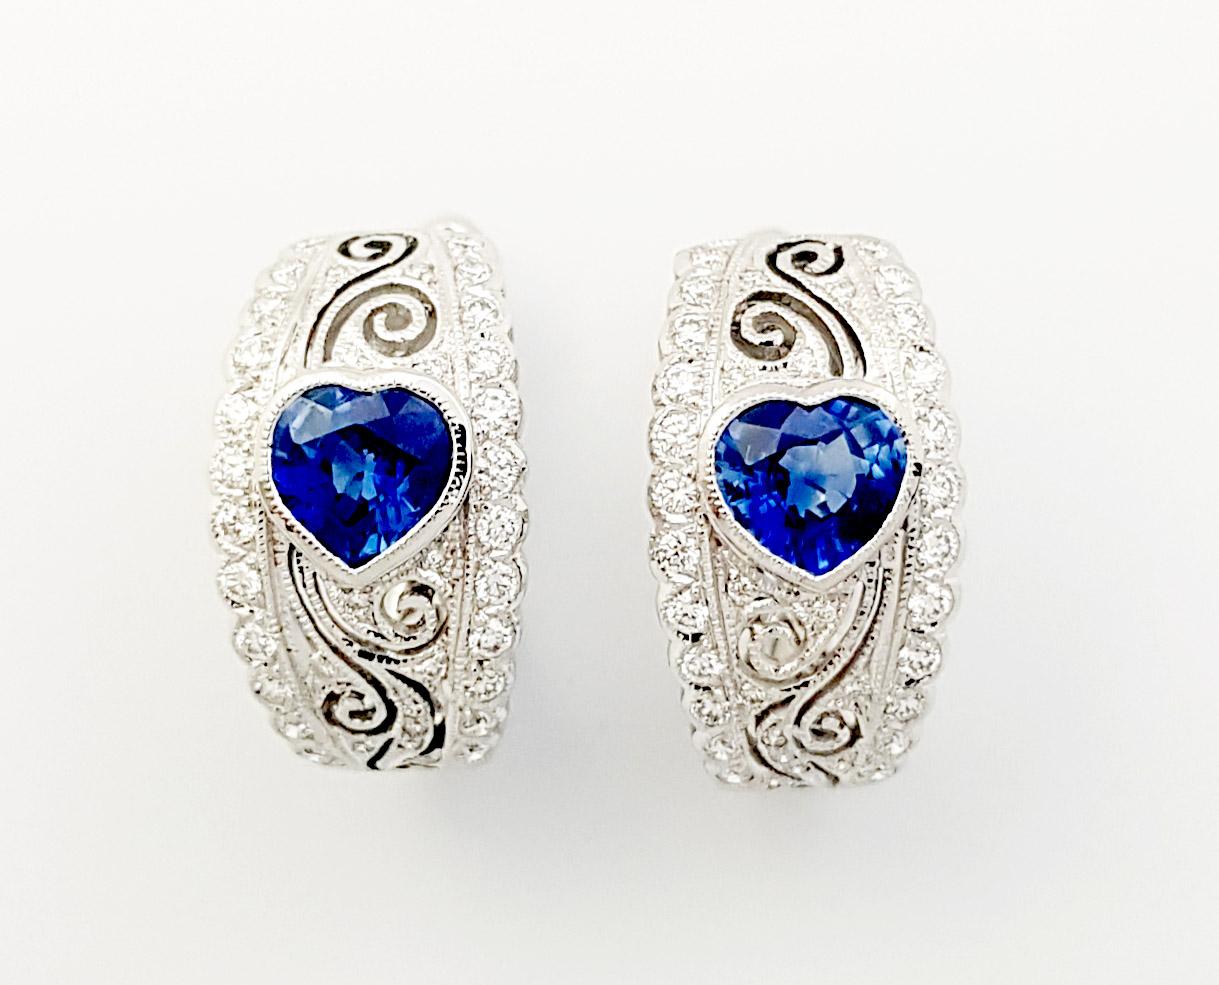 Blue Sapphire 1.98 carats with Diamond 0.48 carat Earrings set in 18K White Gold Settings

Width: 0.9 cm 
Length: 1.7 cm
Total Weight: 6.59 grams

